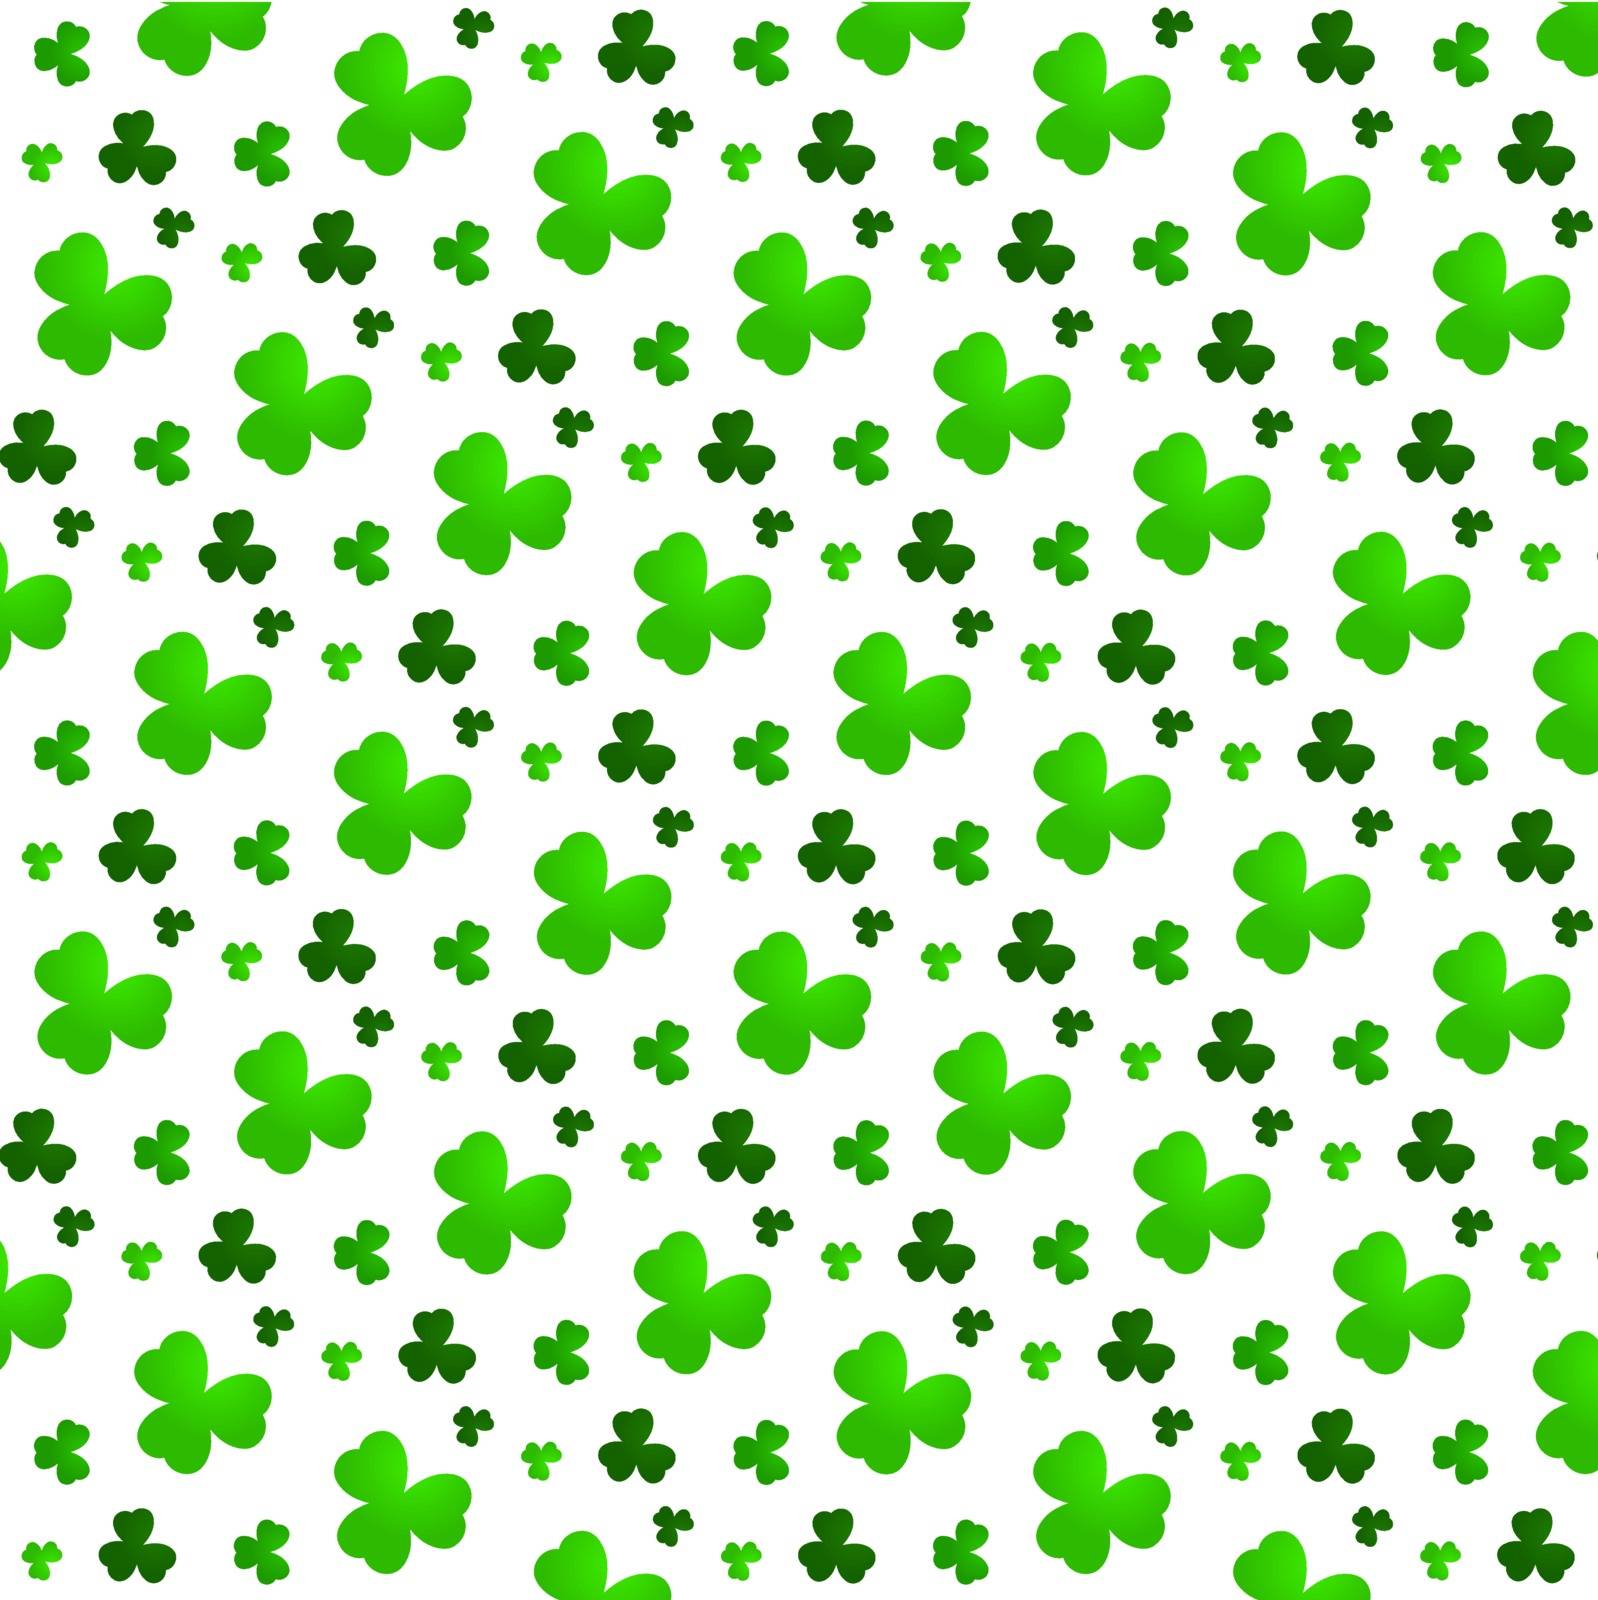 Seamless Clover Background by SNR